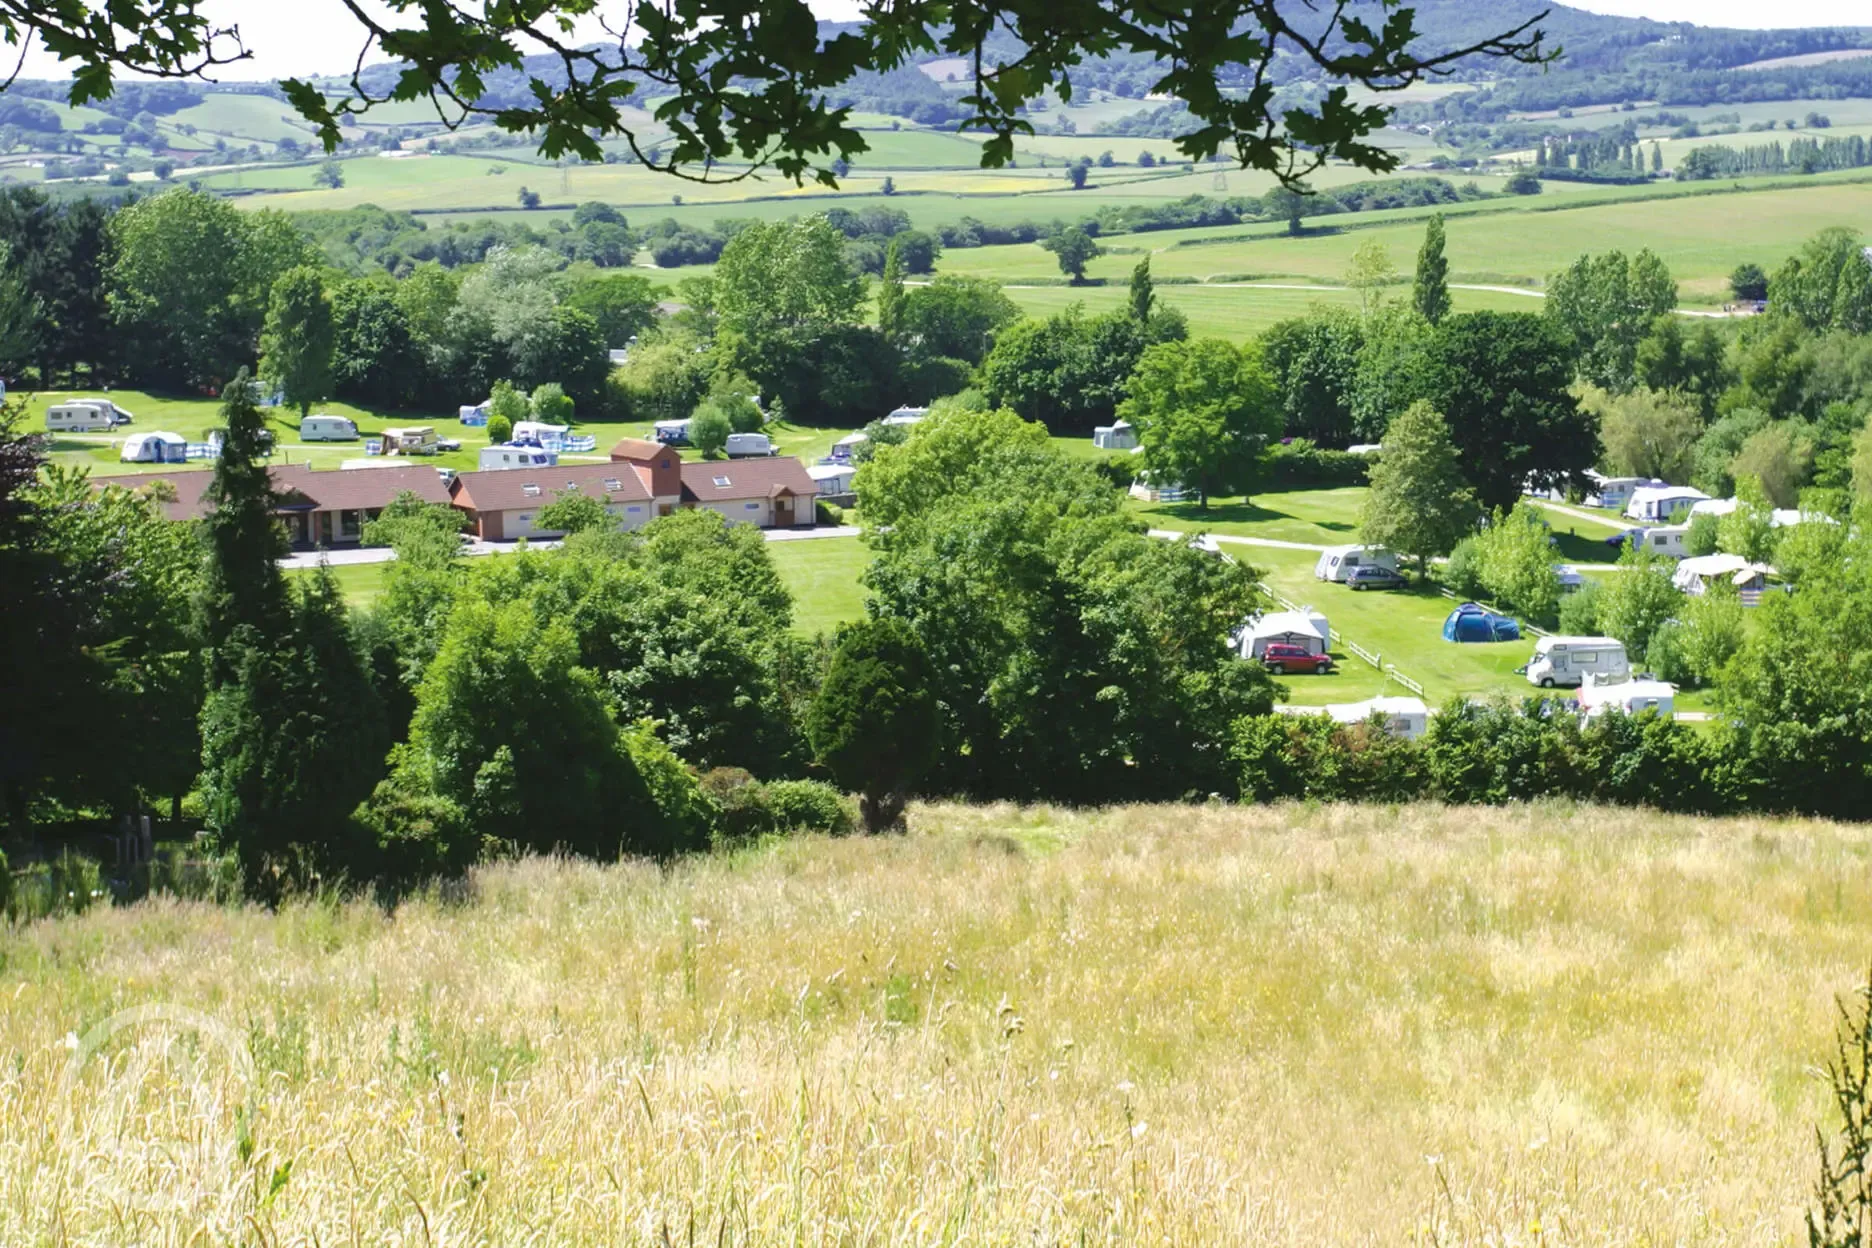 View of the campsite and countryside